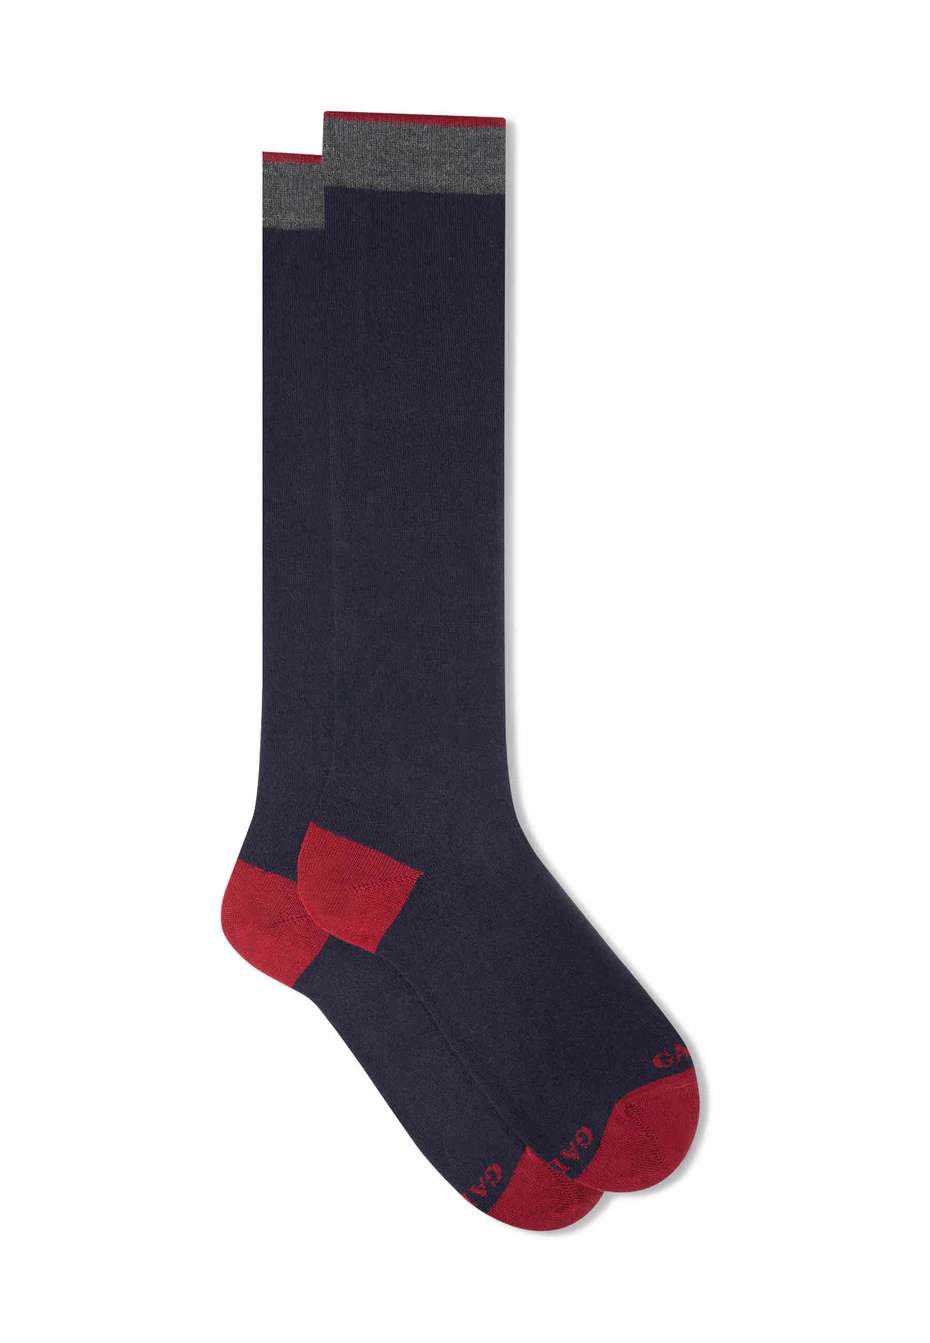 Women's long plain navy cotton and cashmere socks with contrasting details - Gallo 1927 - Official Online Shop